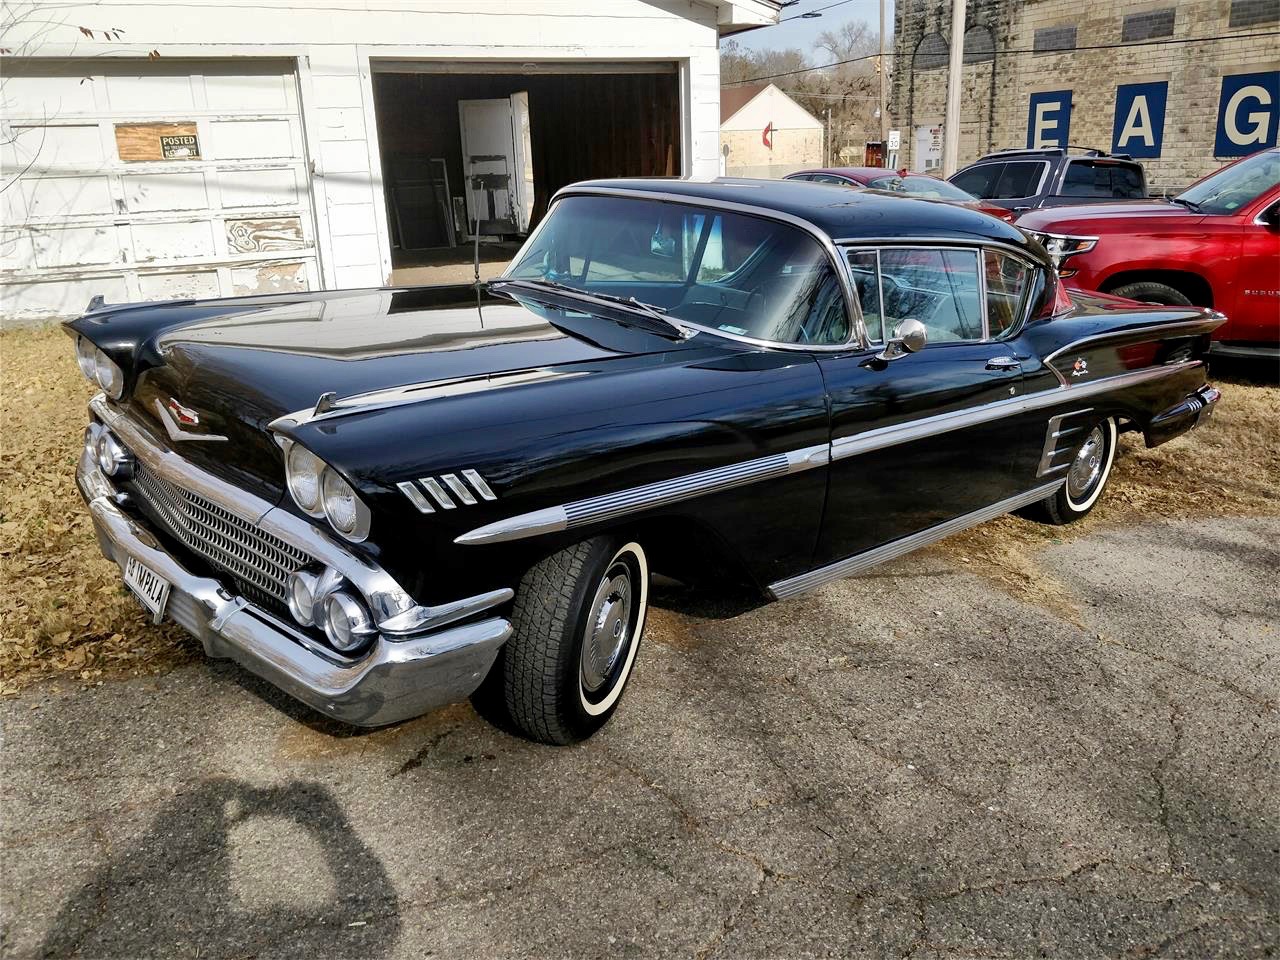 1958 Chevrolet Impala 2-door coupe is a 'midnight beauty'